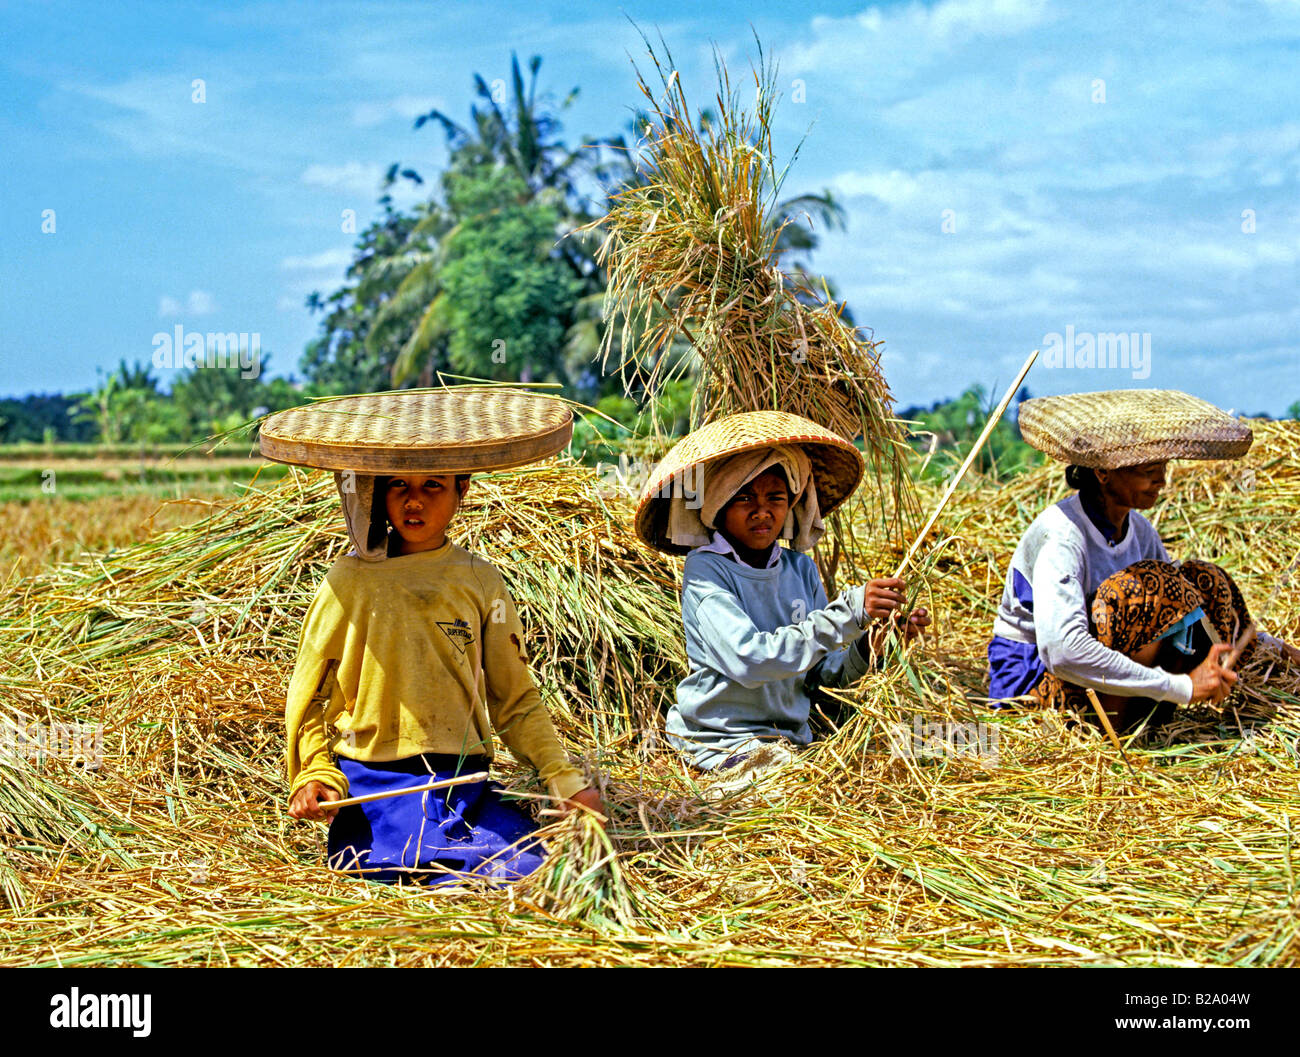 Rice harvest Bali Indonesia Date 28 03 2008 Ref WP B548 111653 0056 COMPULSORY CREDIT World Pictures Photoshot Stock Photo